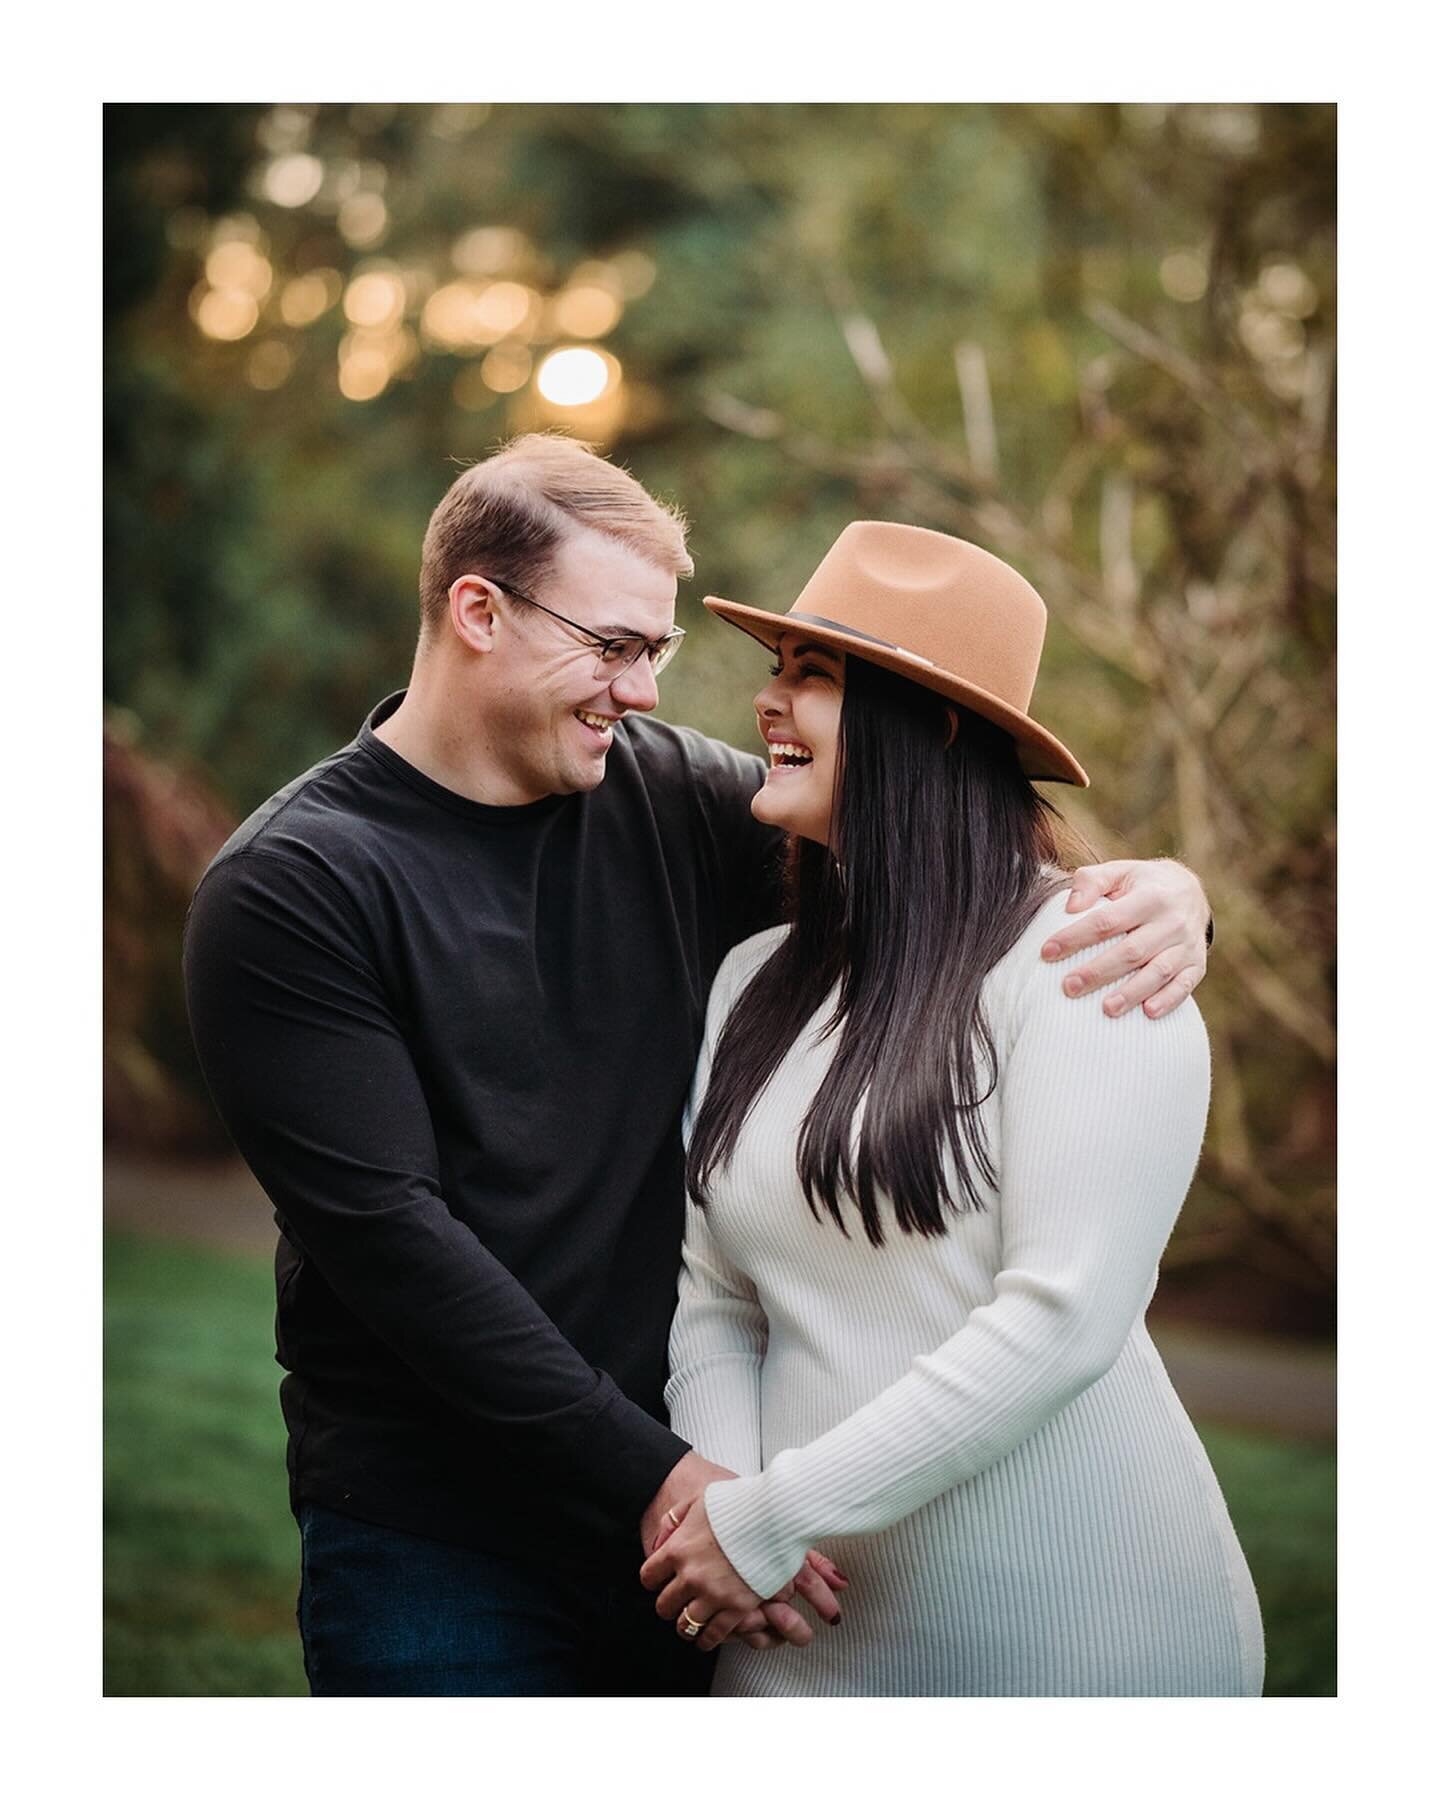 recently engaged? i know you&rsquo;re out there 👀 🥰

winter engagement sessions are still so lovely y&rsquo;all! like with these two. &hearts;️💍

i&rsquo;m close to booked for summer 2024 - so hit me up soooon! spring and fall still have good avai